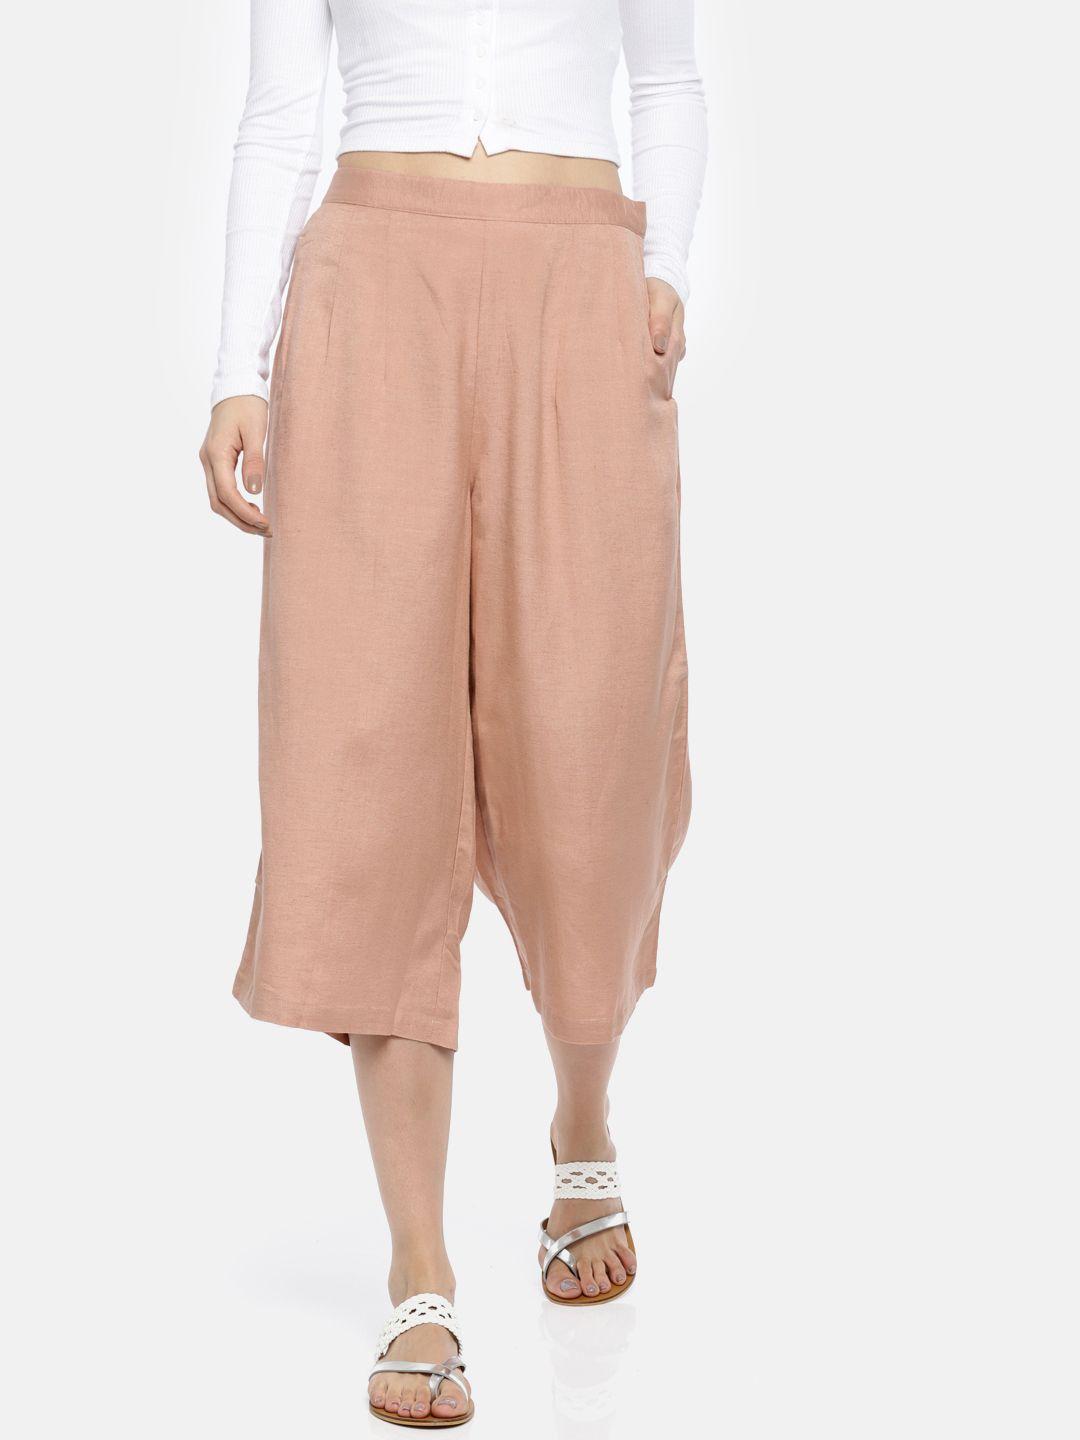 go-colors-women-peach-coloured-flared-solid-culottes